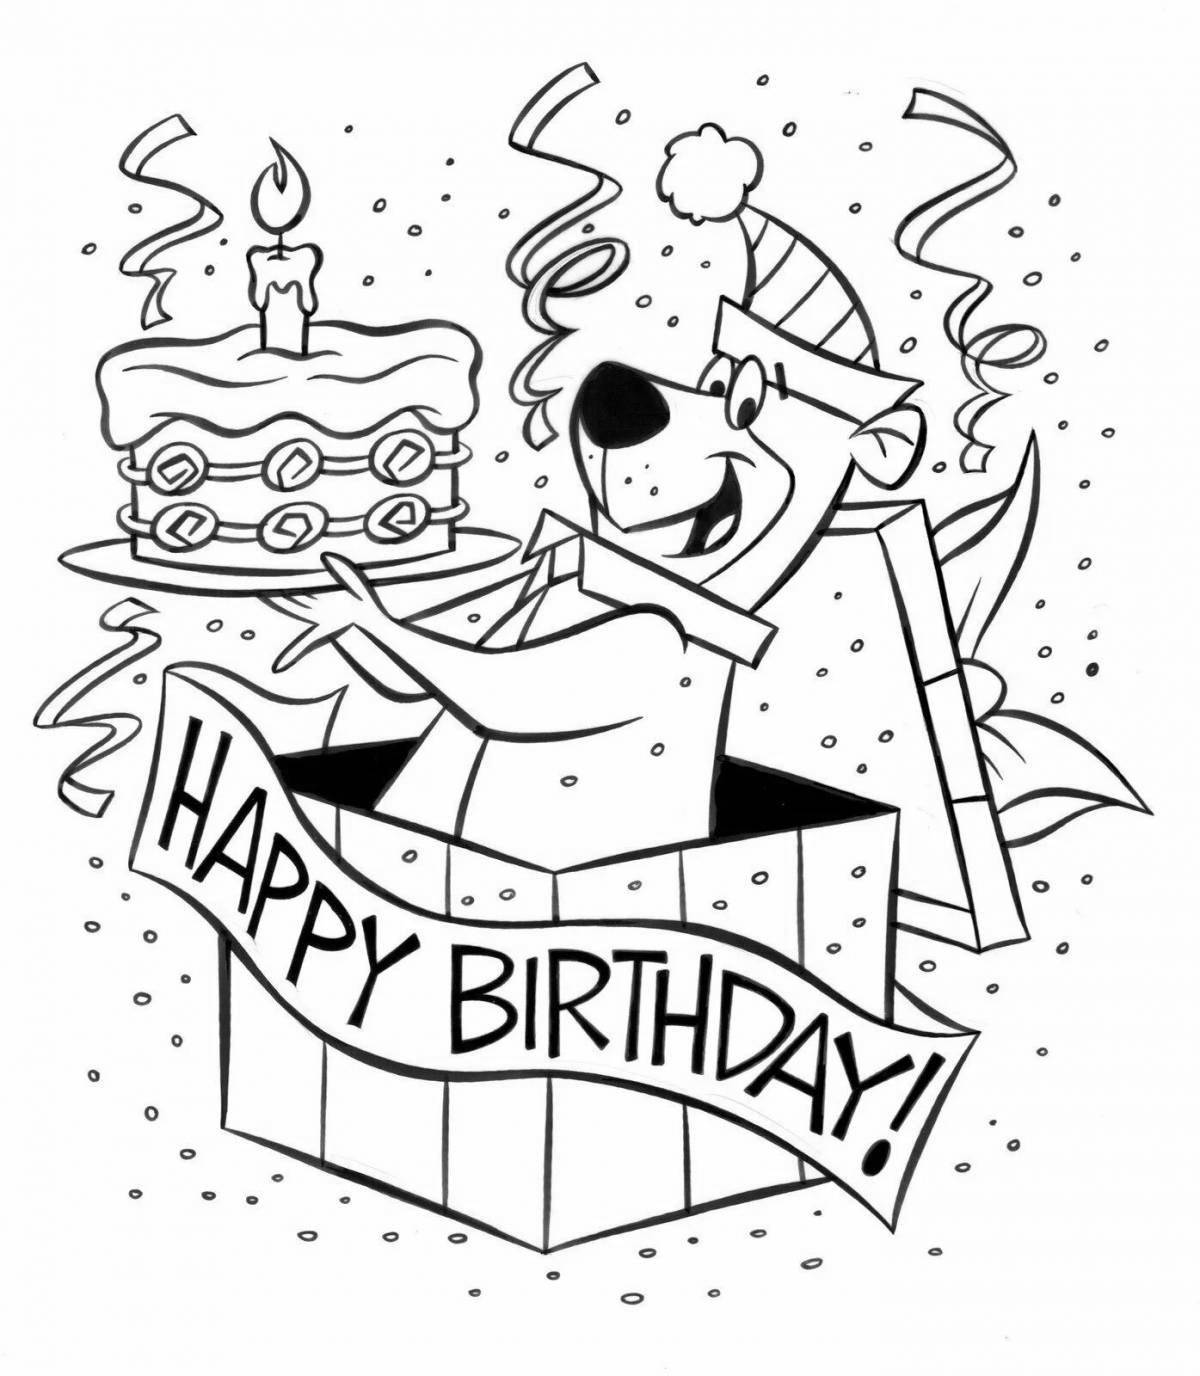 Animated happy birthday card for dad